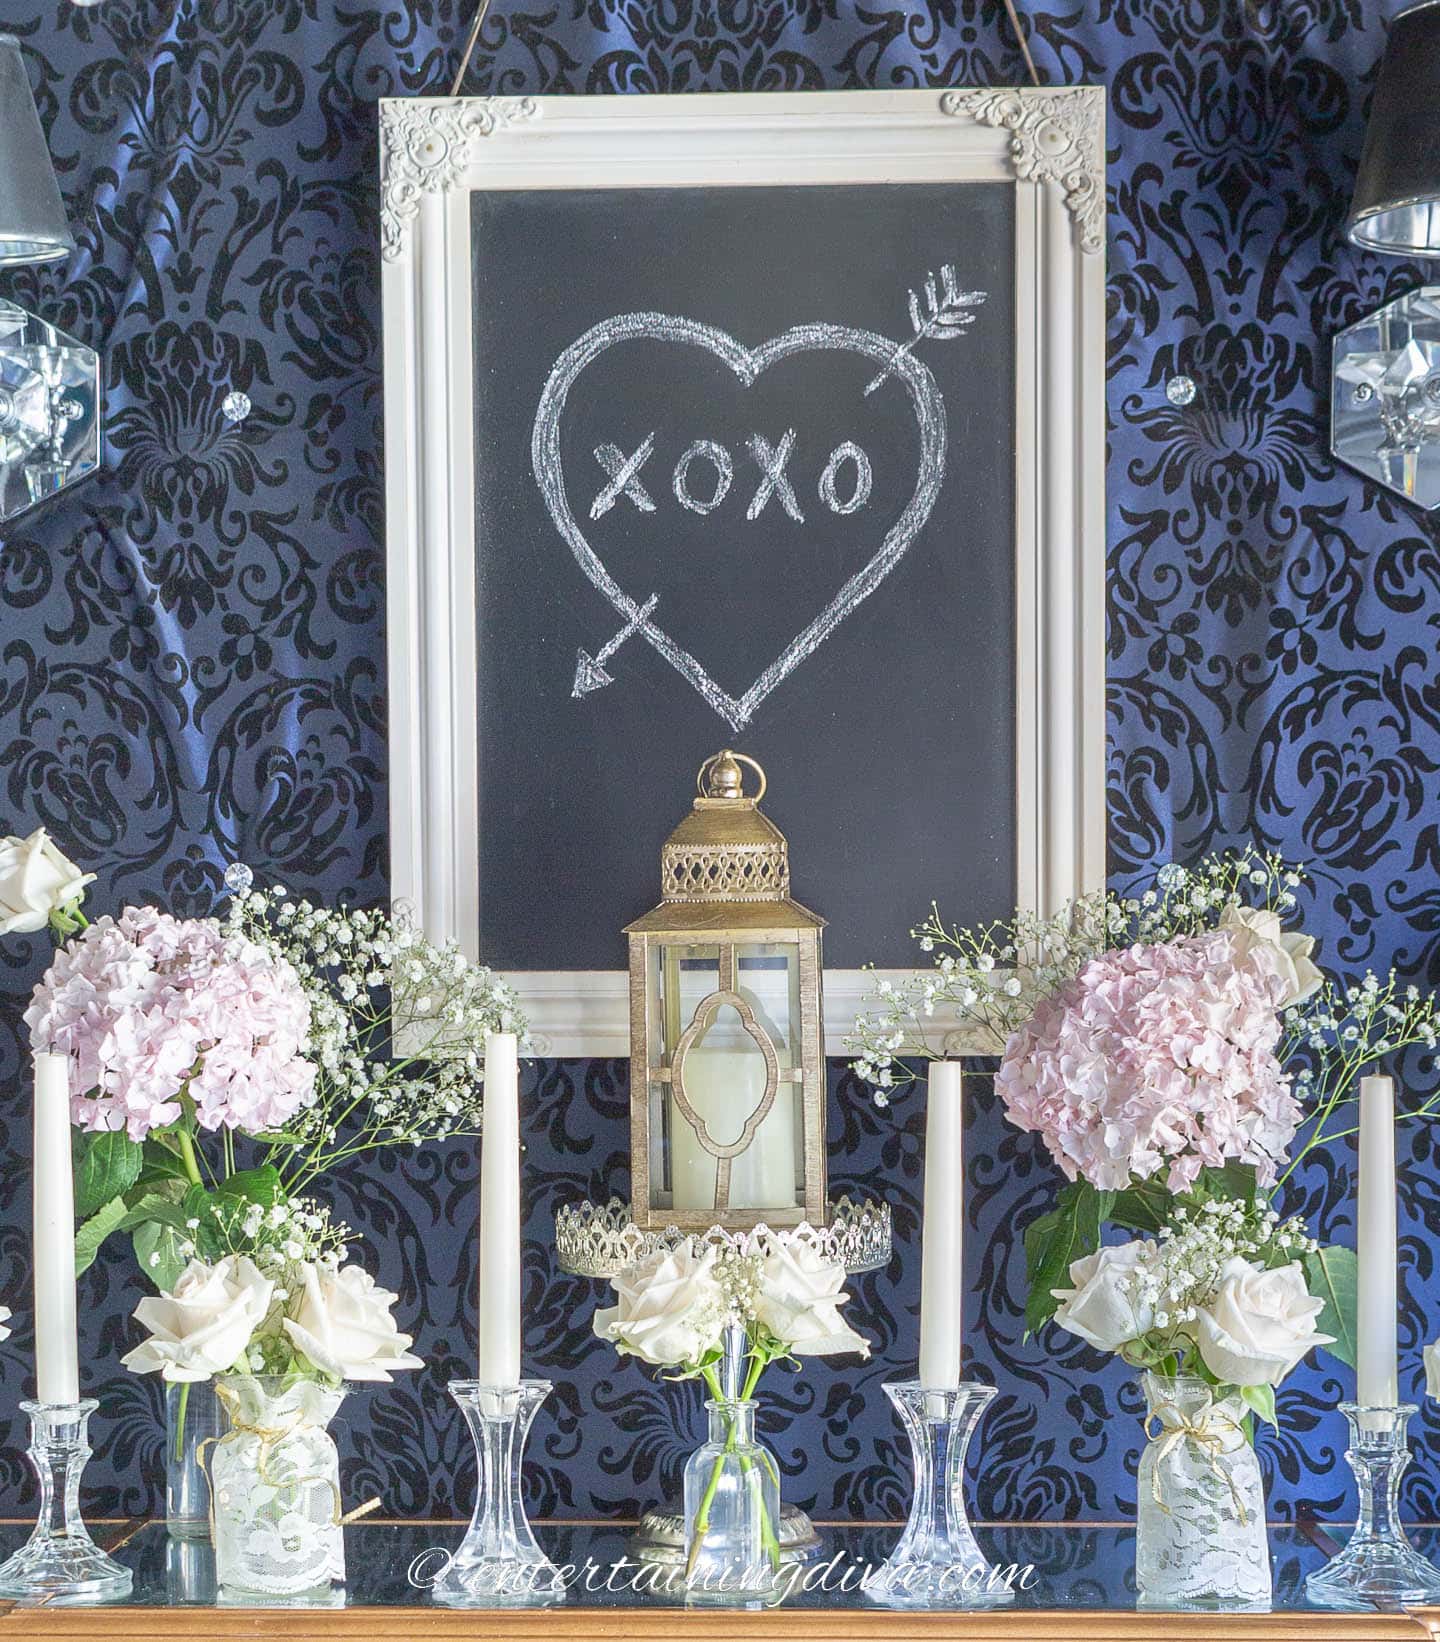 Candle lantern with bouquets of pink hydrangeas and white roses in front of a chalk board sign with a heart on it as part of Valentine tea party decorations on a buffet